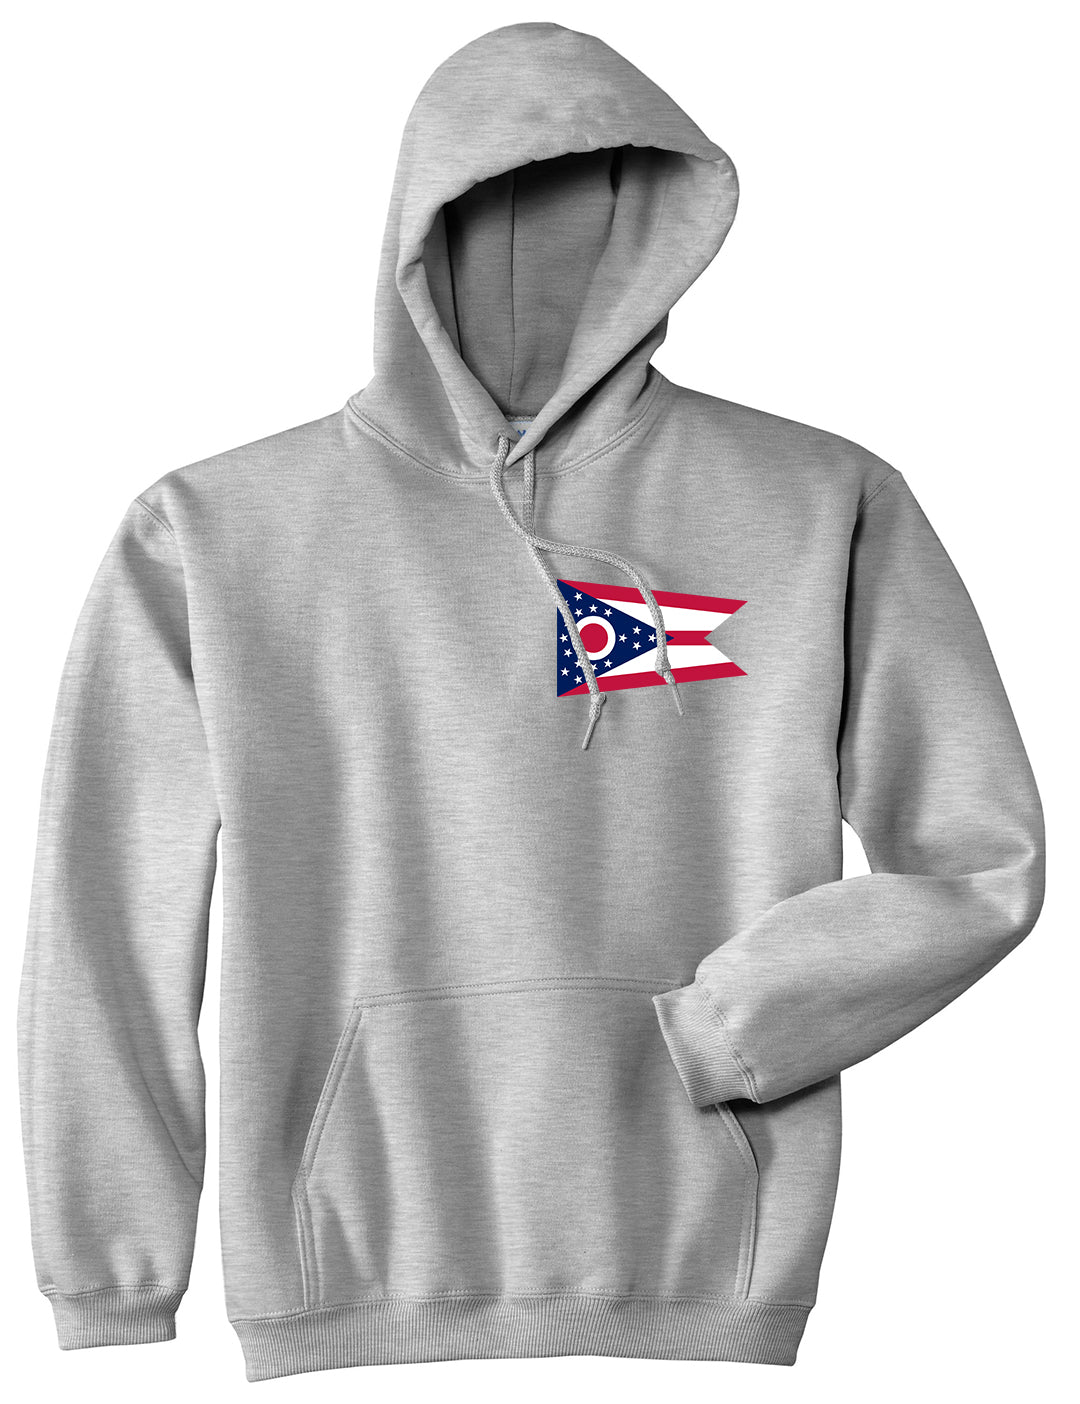 Ohio State Flag OH Chest Mens Pullover Hoodie Grey